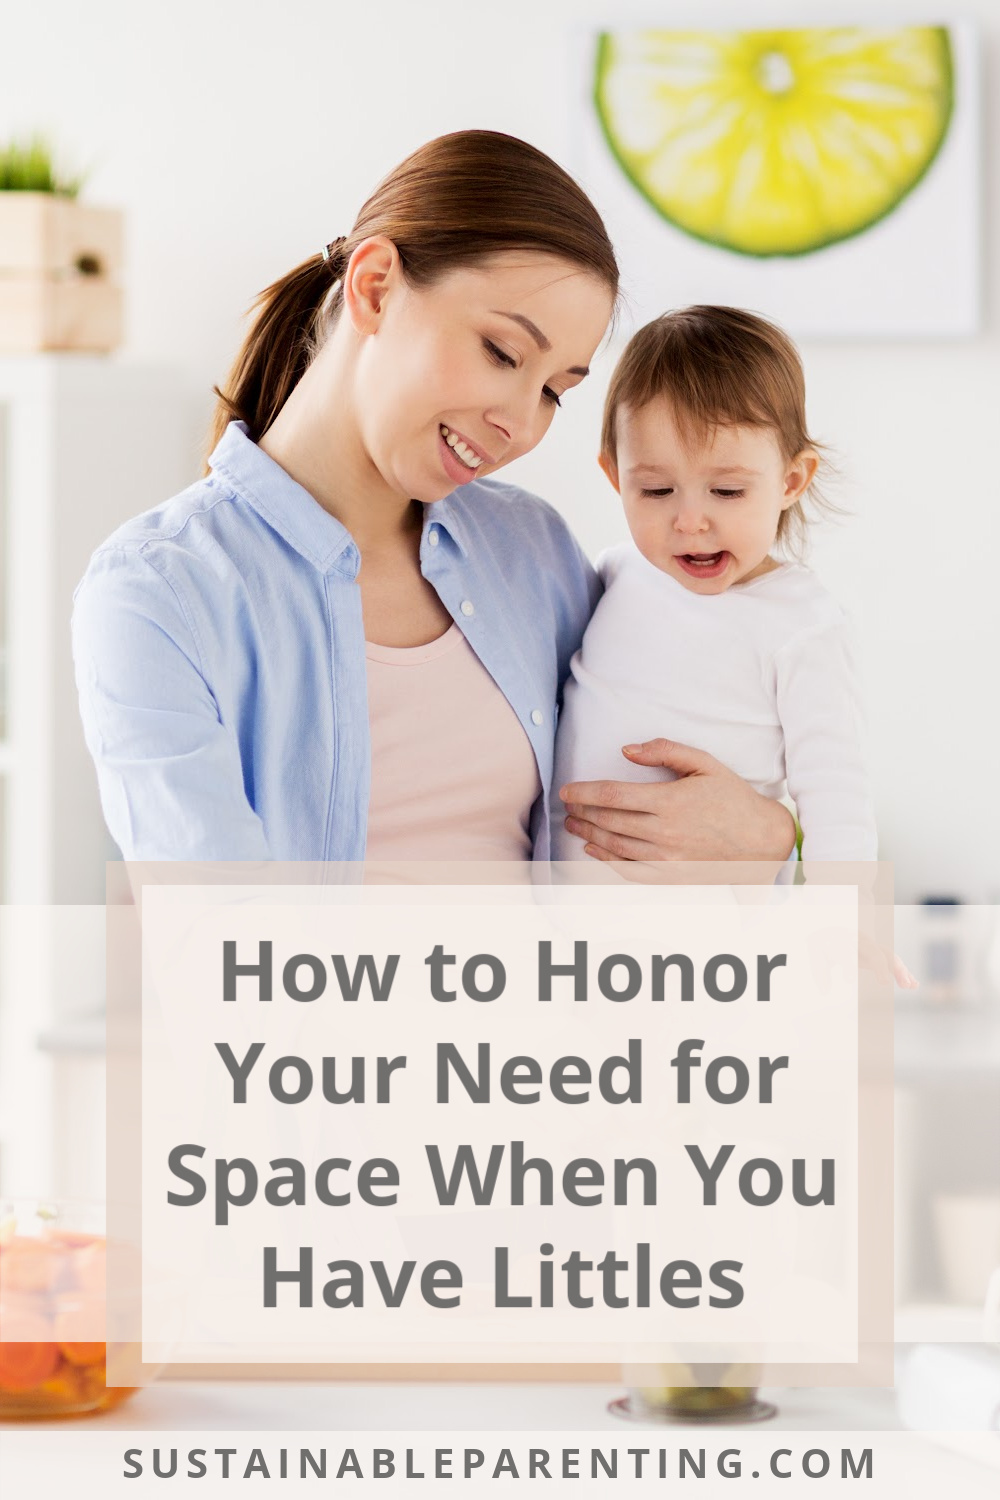 How to Honor Your Need for Space When You Have Littles